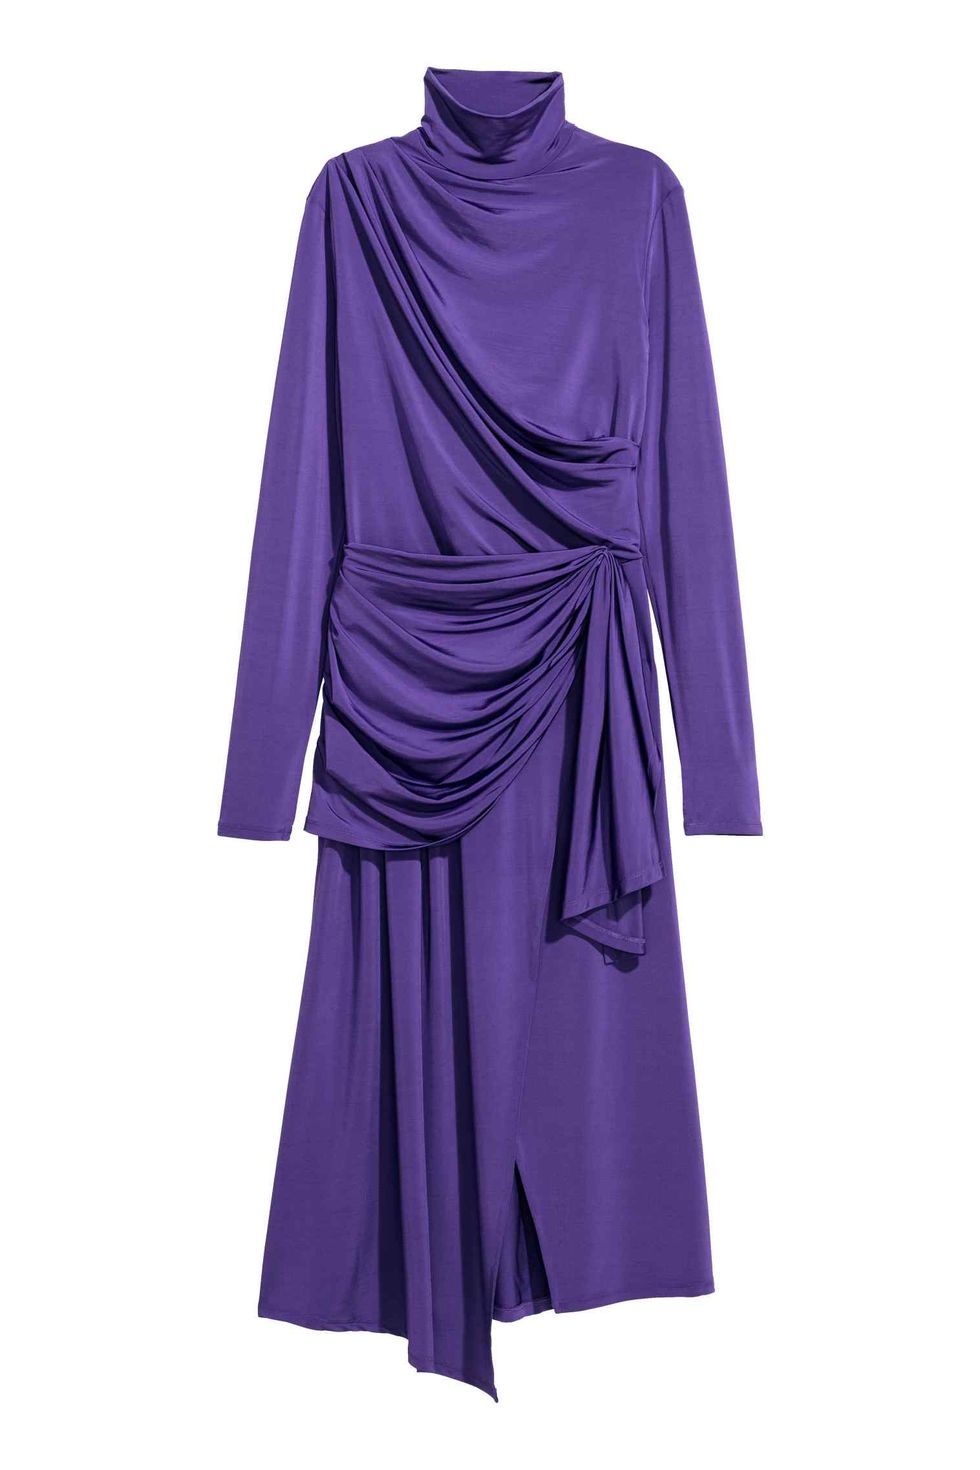 Clothing, Violet, Purple, Dress, Sleeve, Day dress, Outerwear, Cocktail dress, Robe, Wrap, 